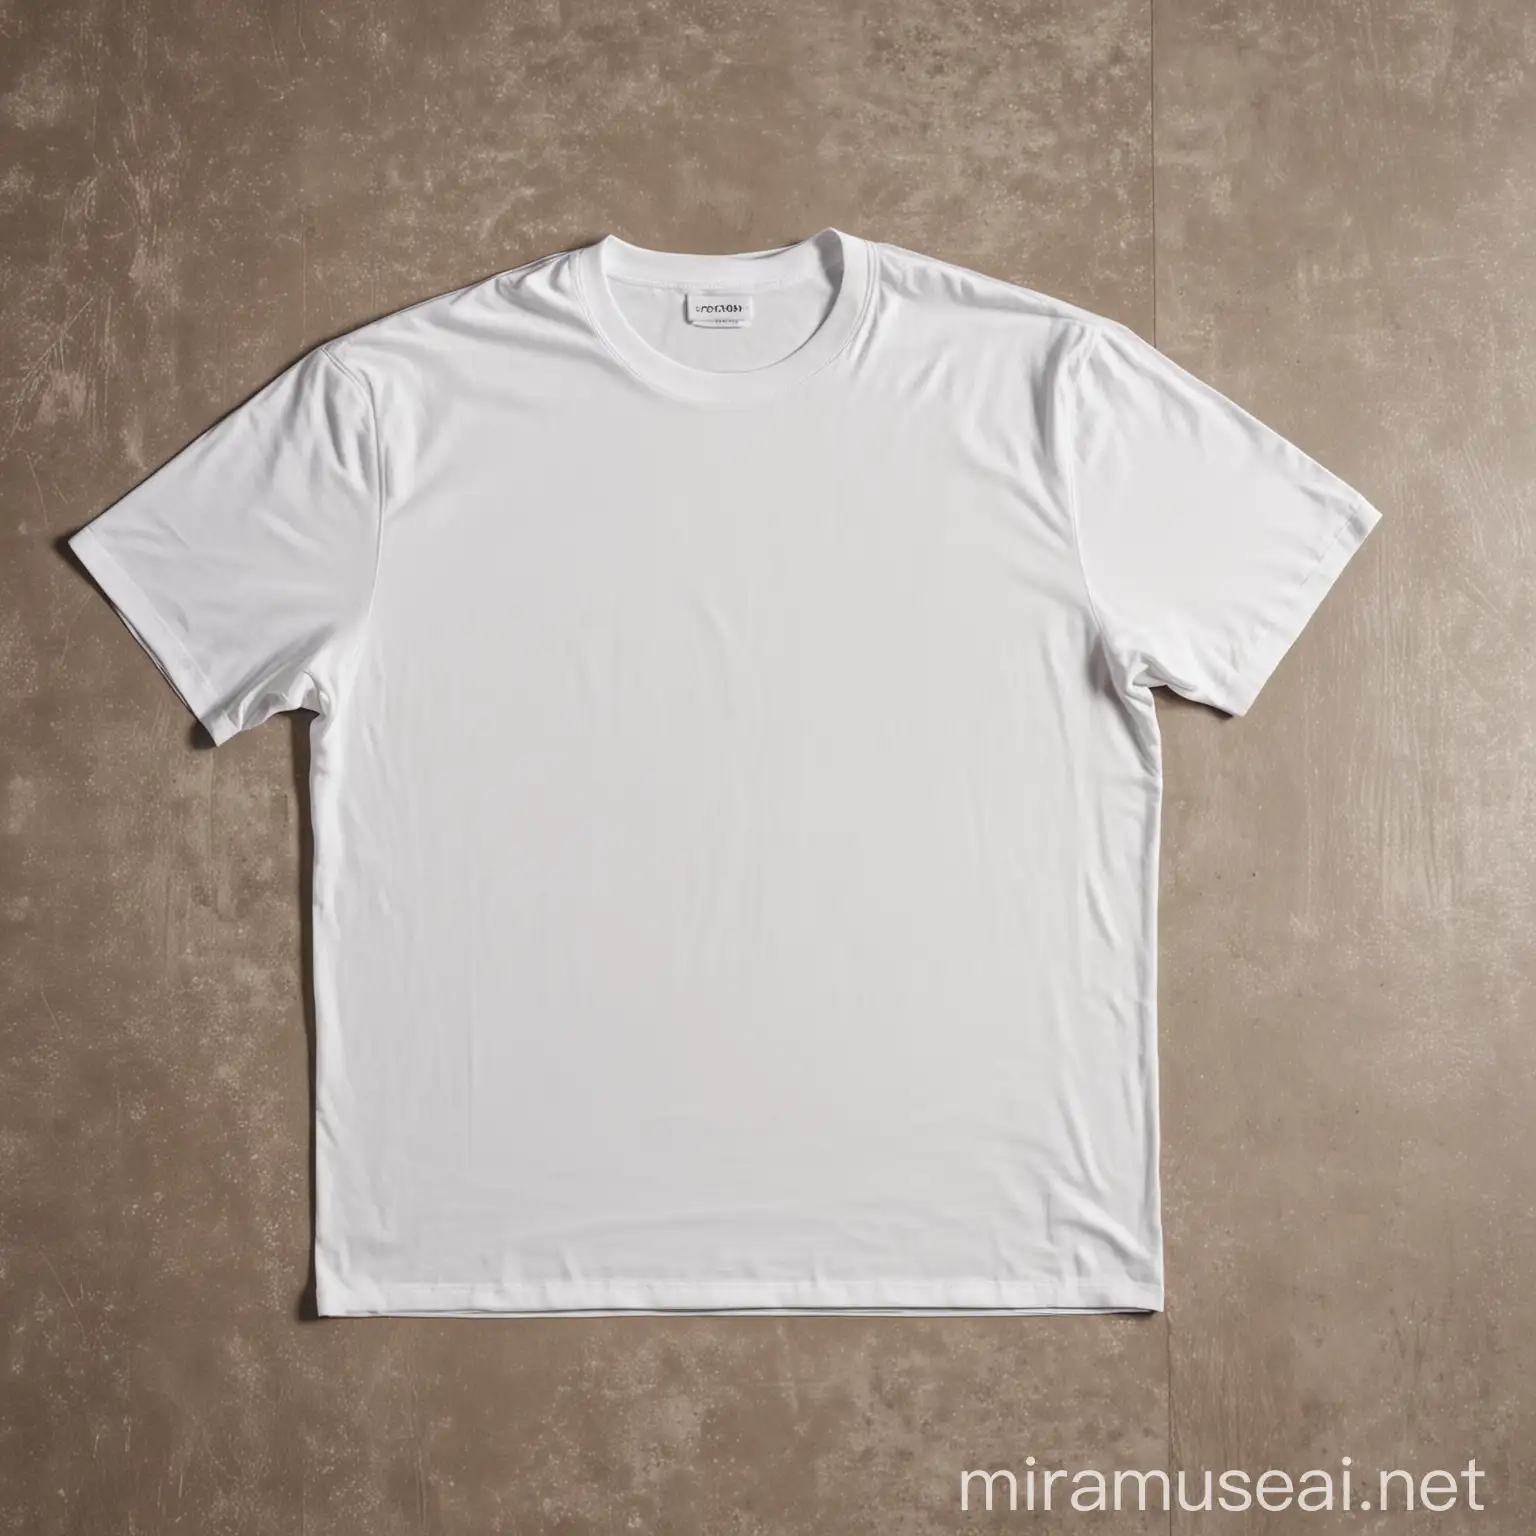 ironed simmetrical proportional white tshirt no wrinkles, lied on floor seen from above with solid contrasting background floor